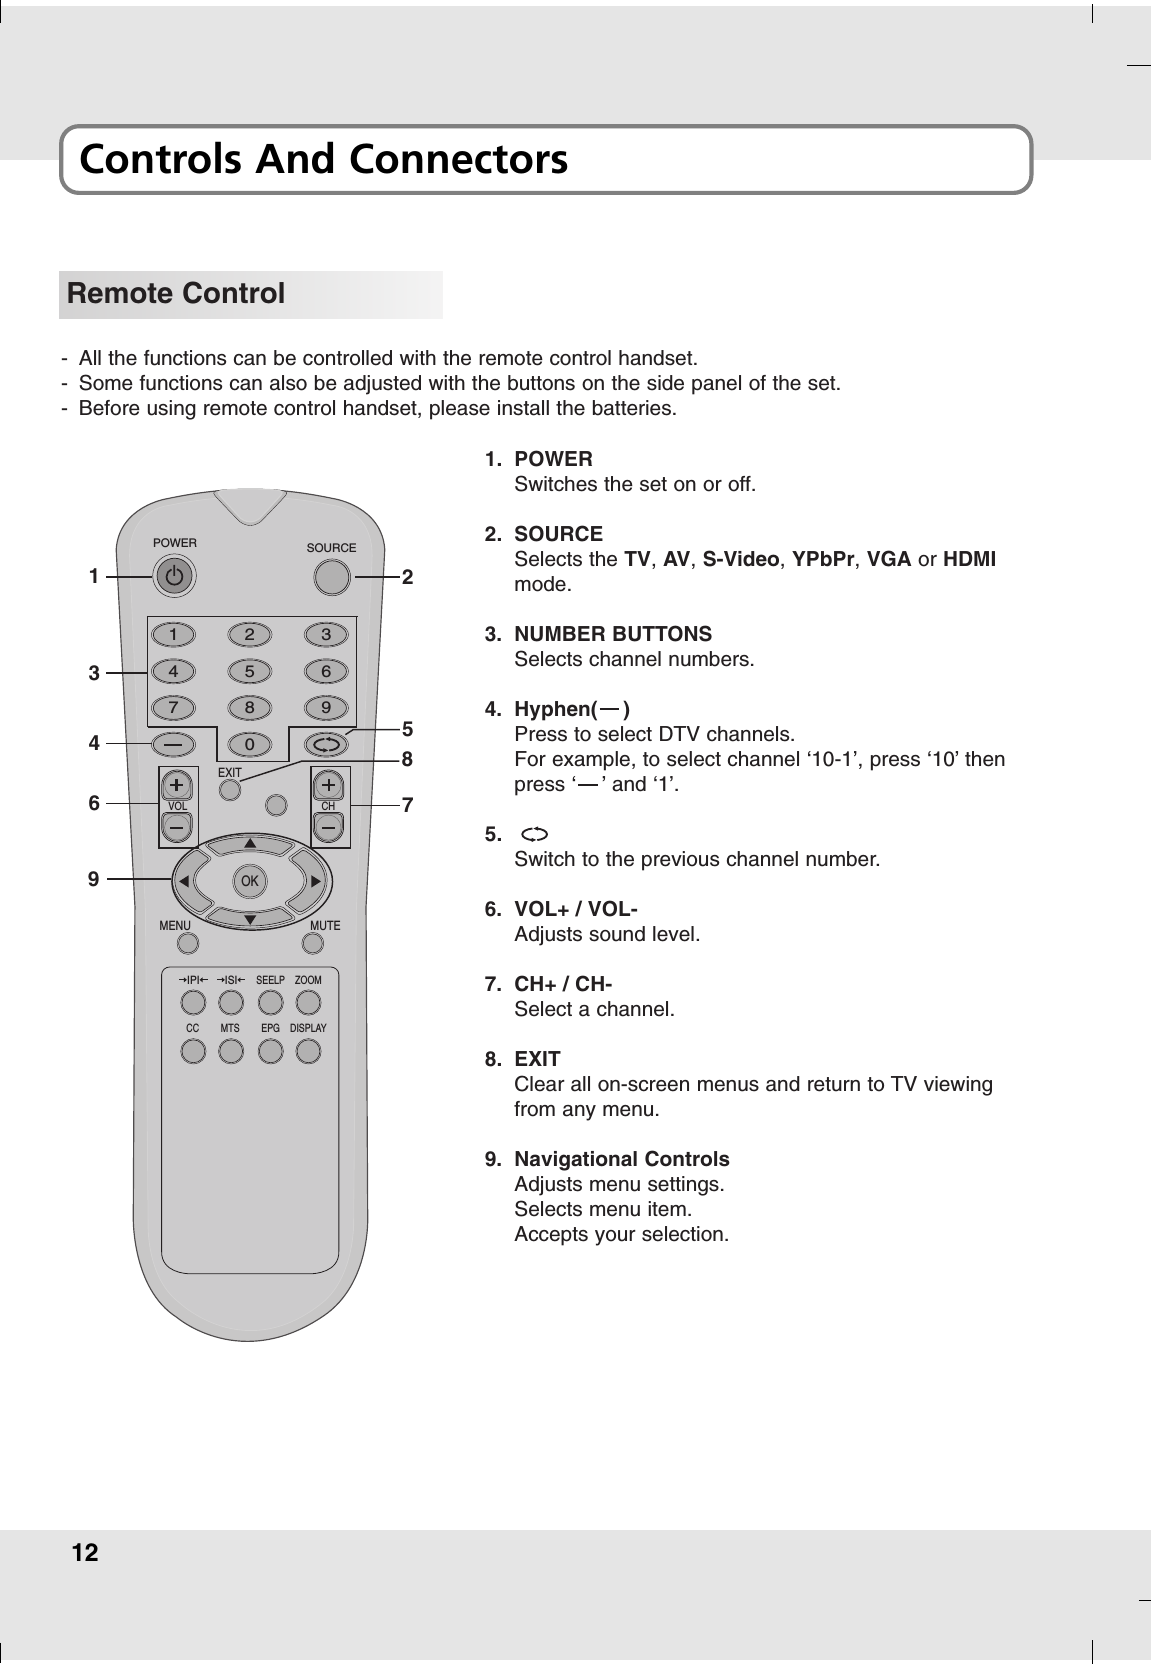 12Controls And ConnectorsRemote Control1 2 34 5 67 8 90EXITVOL CHMENU MUTEOKSOURCEPOWERSEELP ZOOMIPI ISIEPGMTSCC DISPLAY1. POWERSwitches the set on or off.2. SOURCESelects the TV, AV,S-Video, YPbPr,VGA or HDMImode.3. NUMBER BUTTONSSelects channel numbers.4. Hyphen(    )Press to select DTV channels. For example, to select channel ‘10-1’, press ‘10’ thenpress ‘    ’ and ‘1’.5.Switch to the previous channel number.6. VOL+ / VOL-Adjusts sound level.7. CH+ / CH-Select a channel.8. EXITClear all on-screen menus and return to TV viewingfrom any menu.9. Navigational ControlsAdjusts menu settings.Selects menu item.Accepts your selection.-All the functions can be controlled with the remote control handset.-Some functions can also be adjusted with the buttons on the side panel of the set.-Before using remote control handset, please install the batteries.134625789